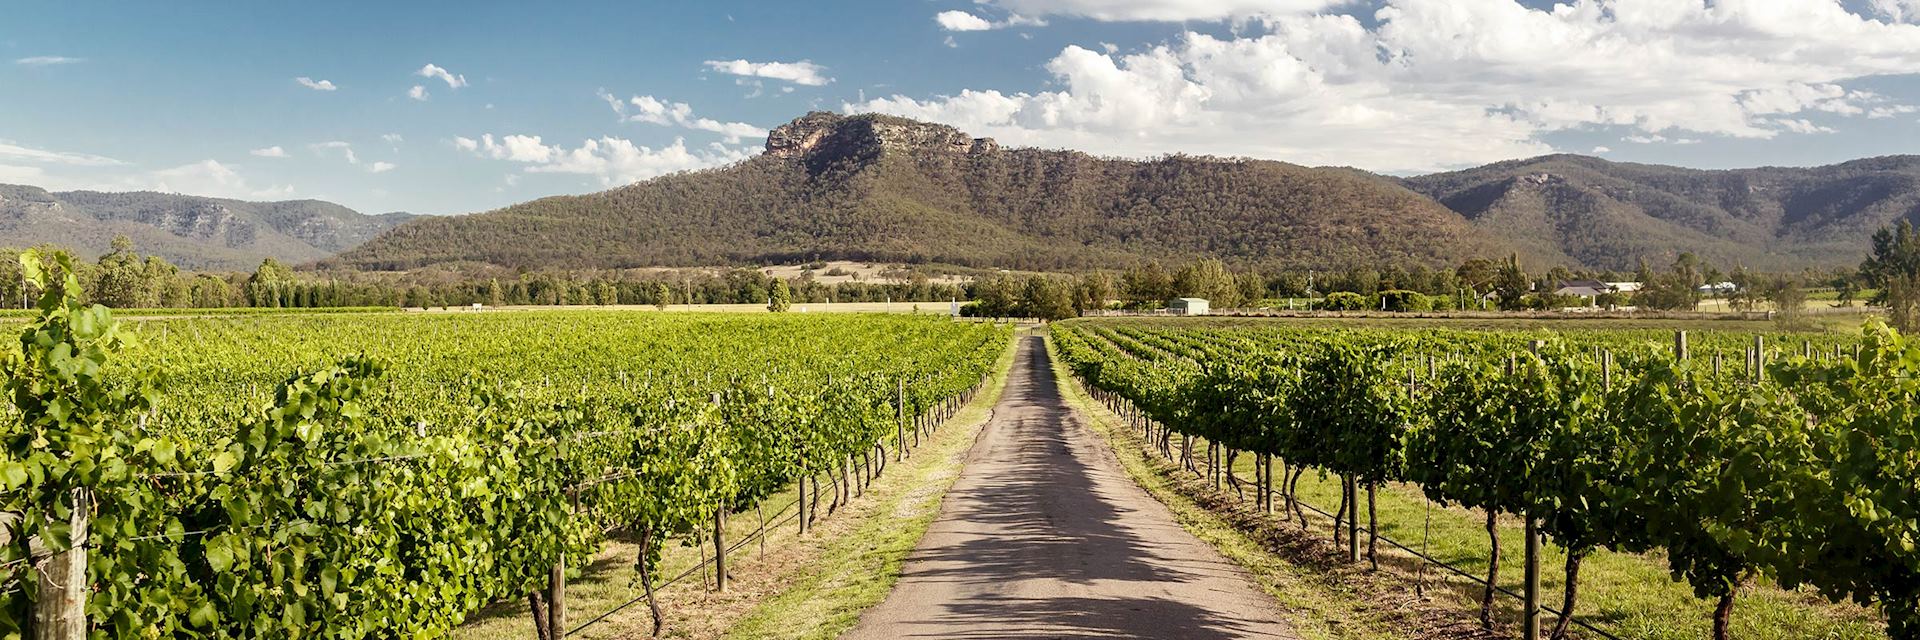 Visit Hunter Valley on a trip to Australia | Audley Travel